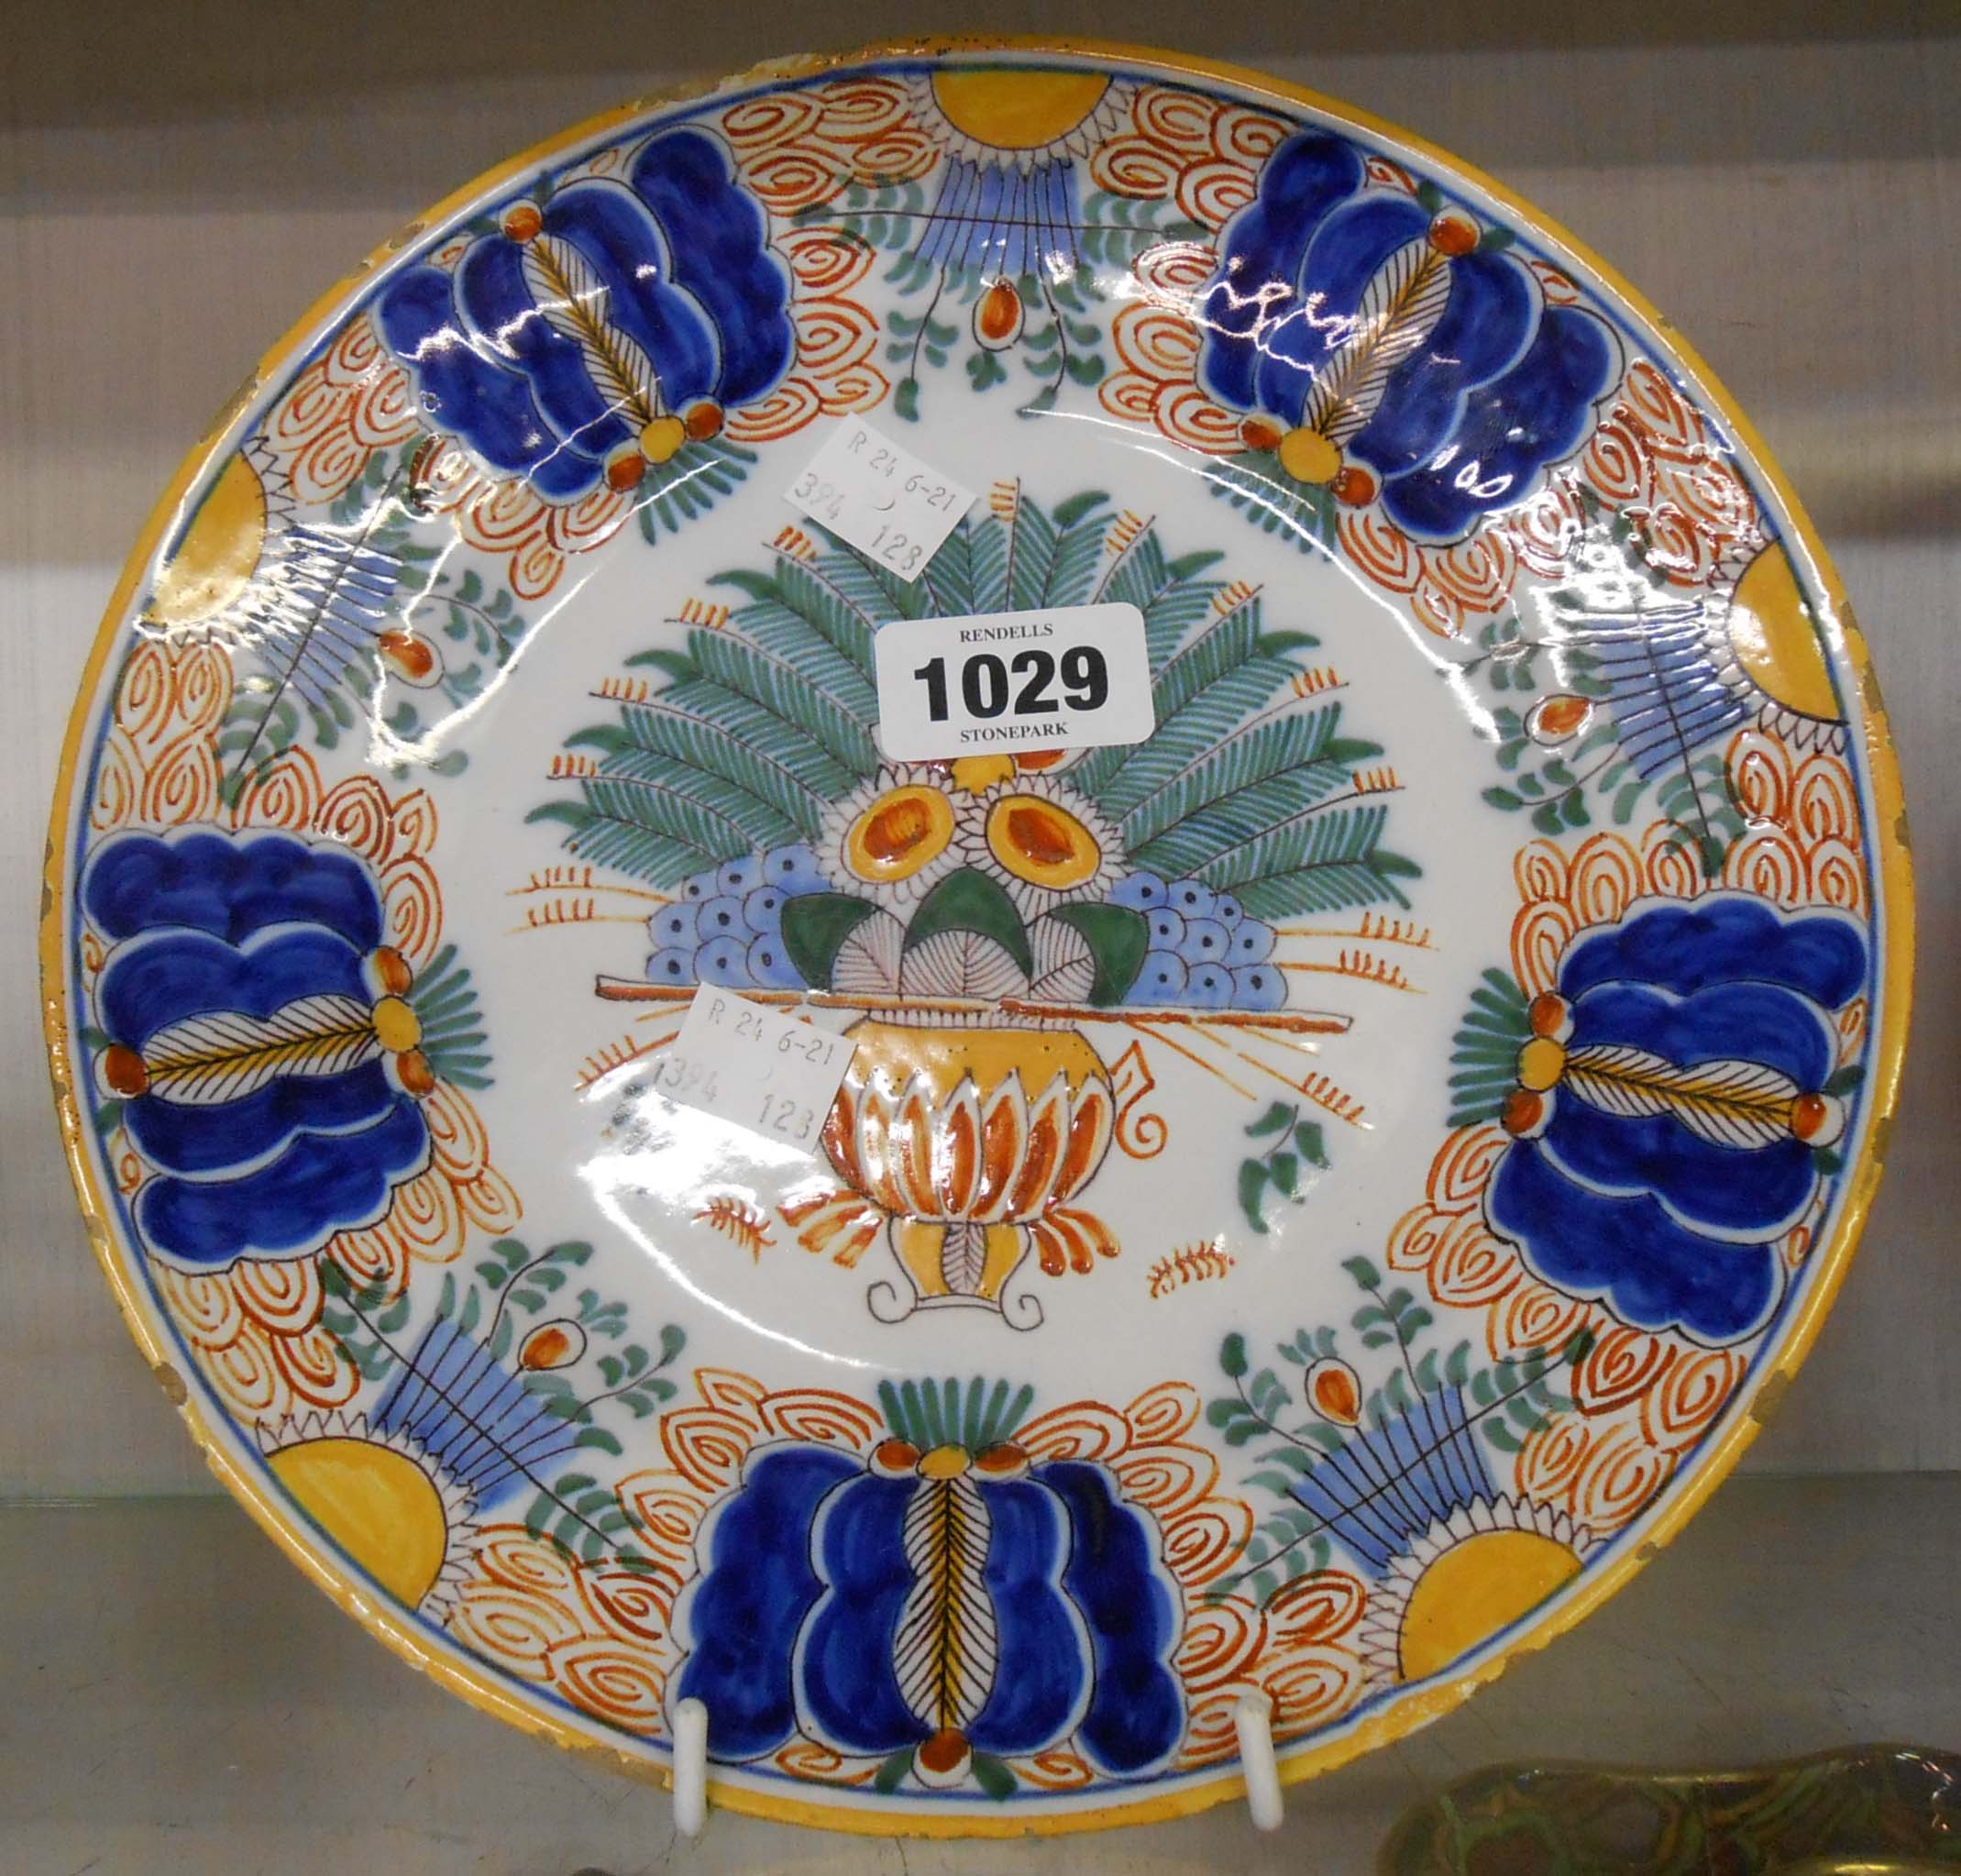 An 18th Century Dutch Delft plate hand painted in polychrome with a large central floral urn